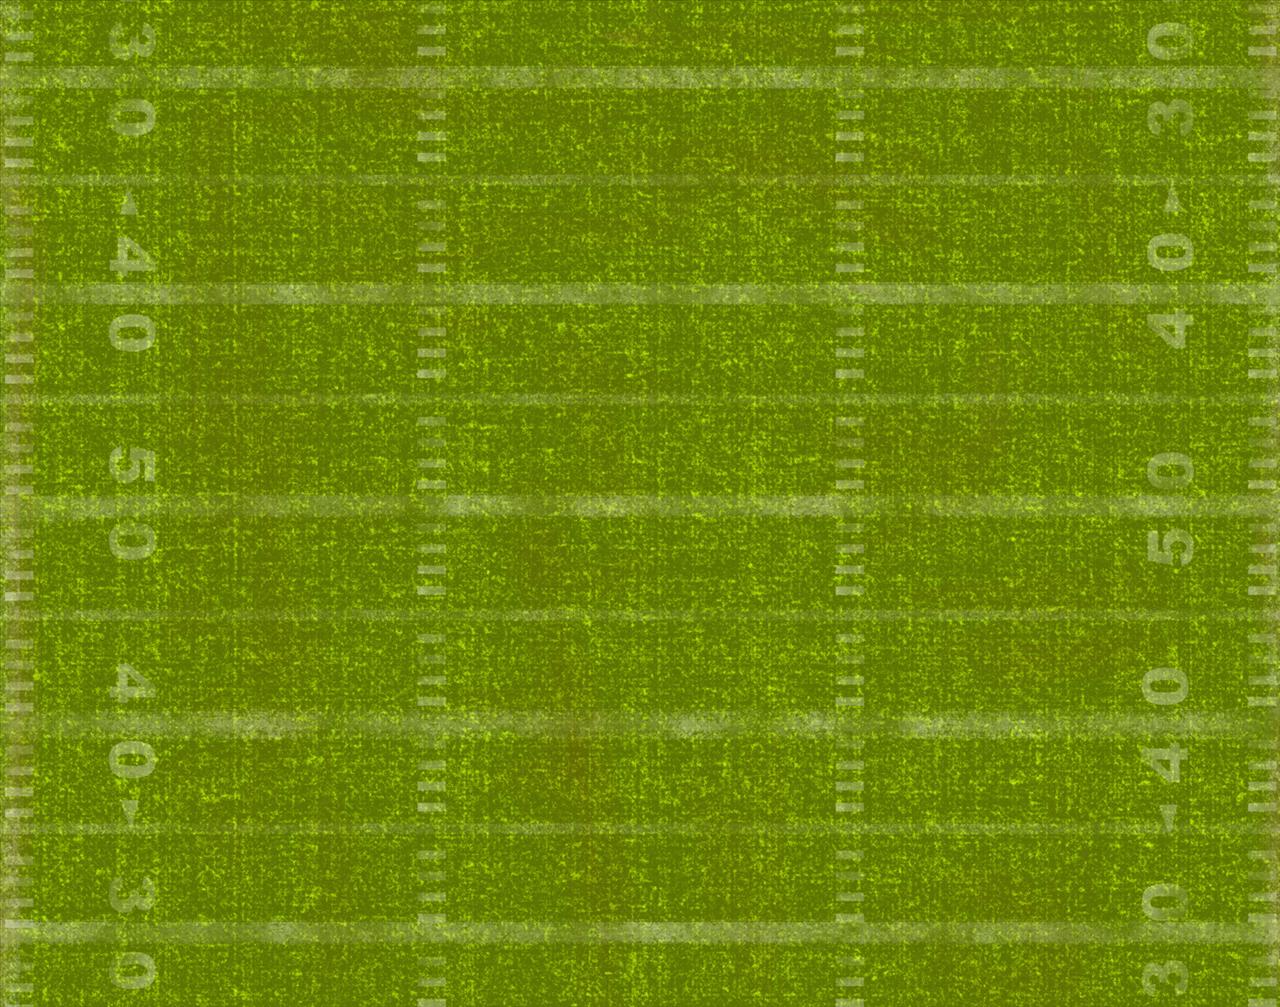 Football Field - Grungy Athlete Background